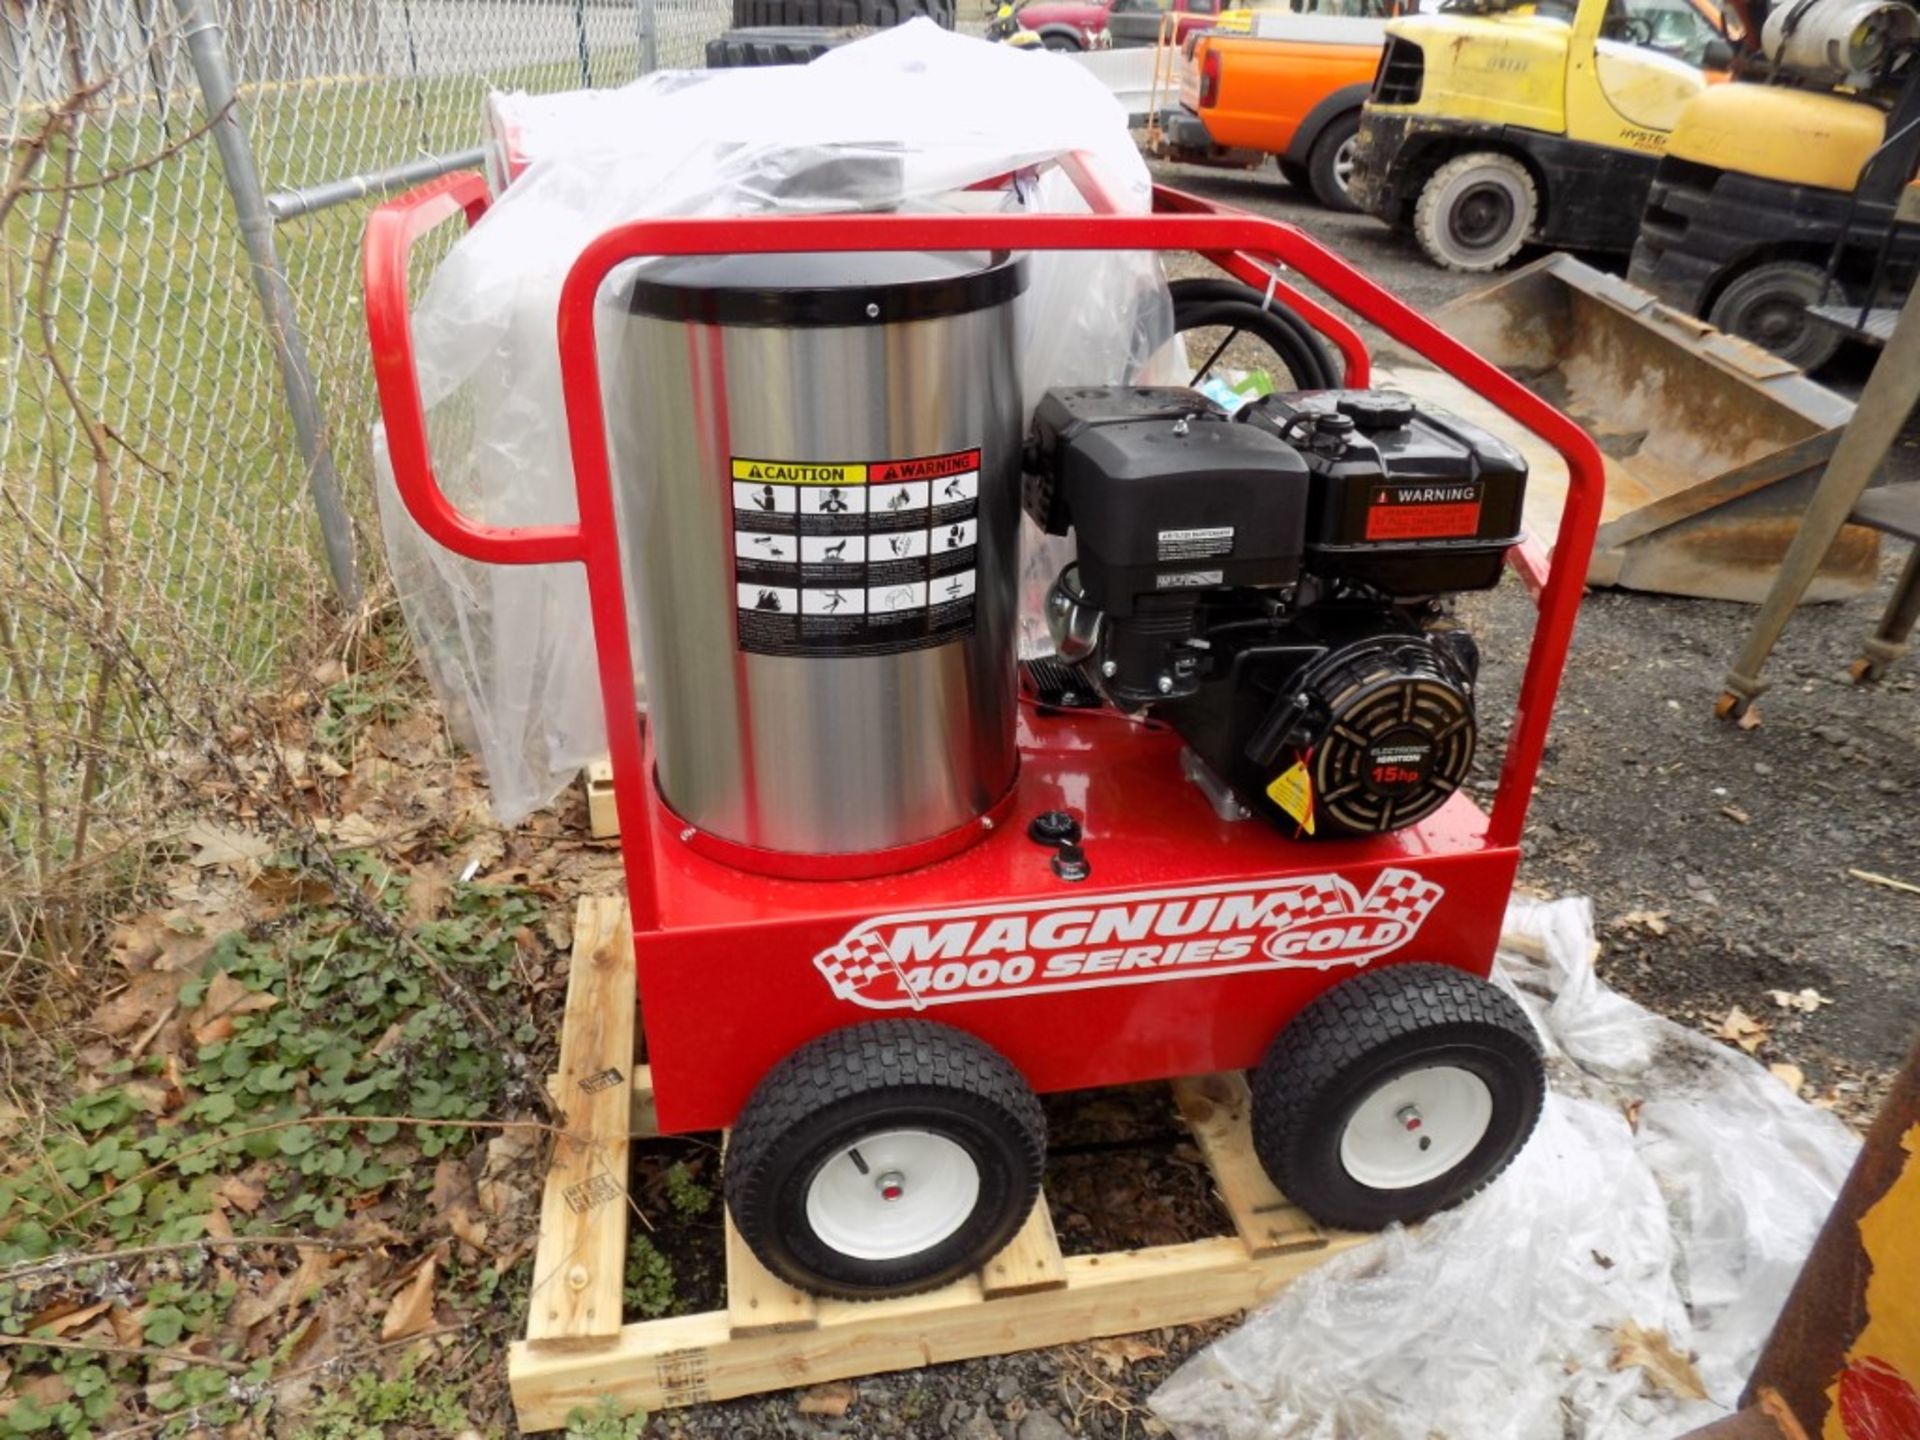 New, Easy Kleen Magnum 4000 Pressure Washer, Self-Contained w/Gas Engine And Kero/Dsl. Burner